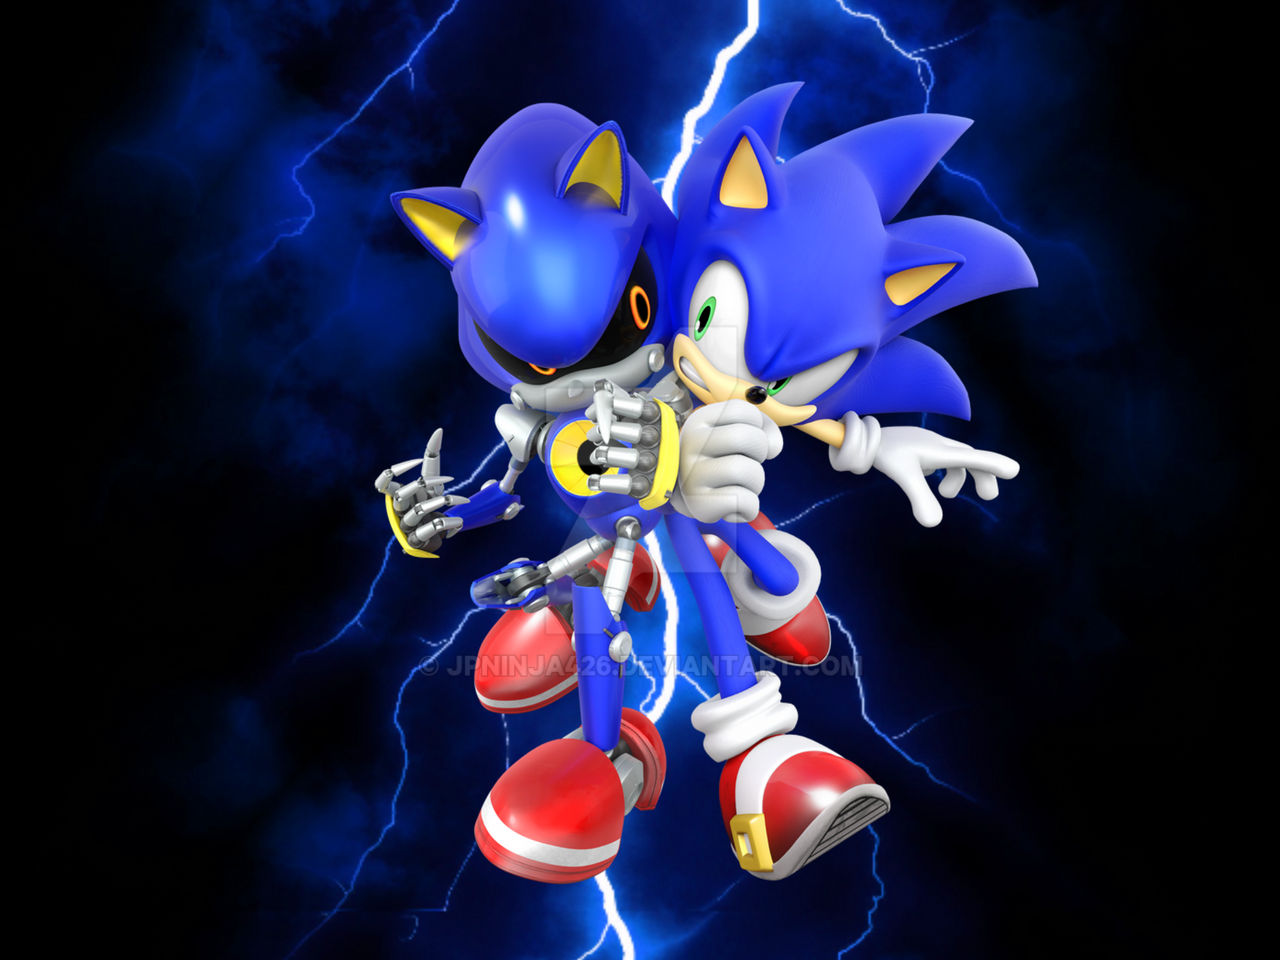 TBSF on X: Here's Another Dark Super Sonic Render!   / X